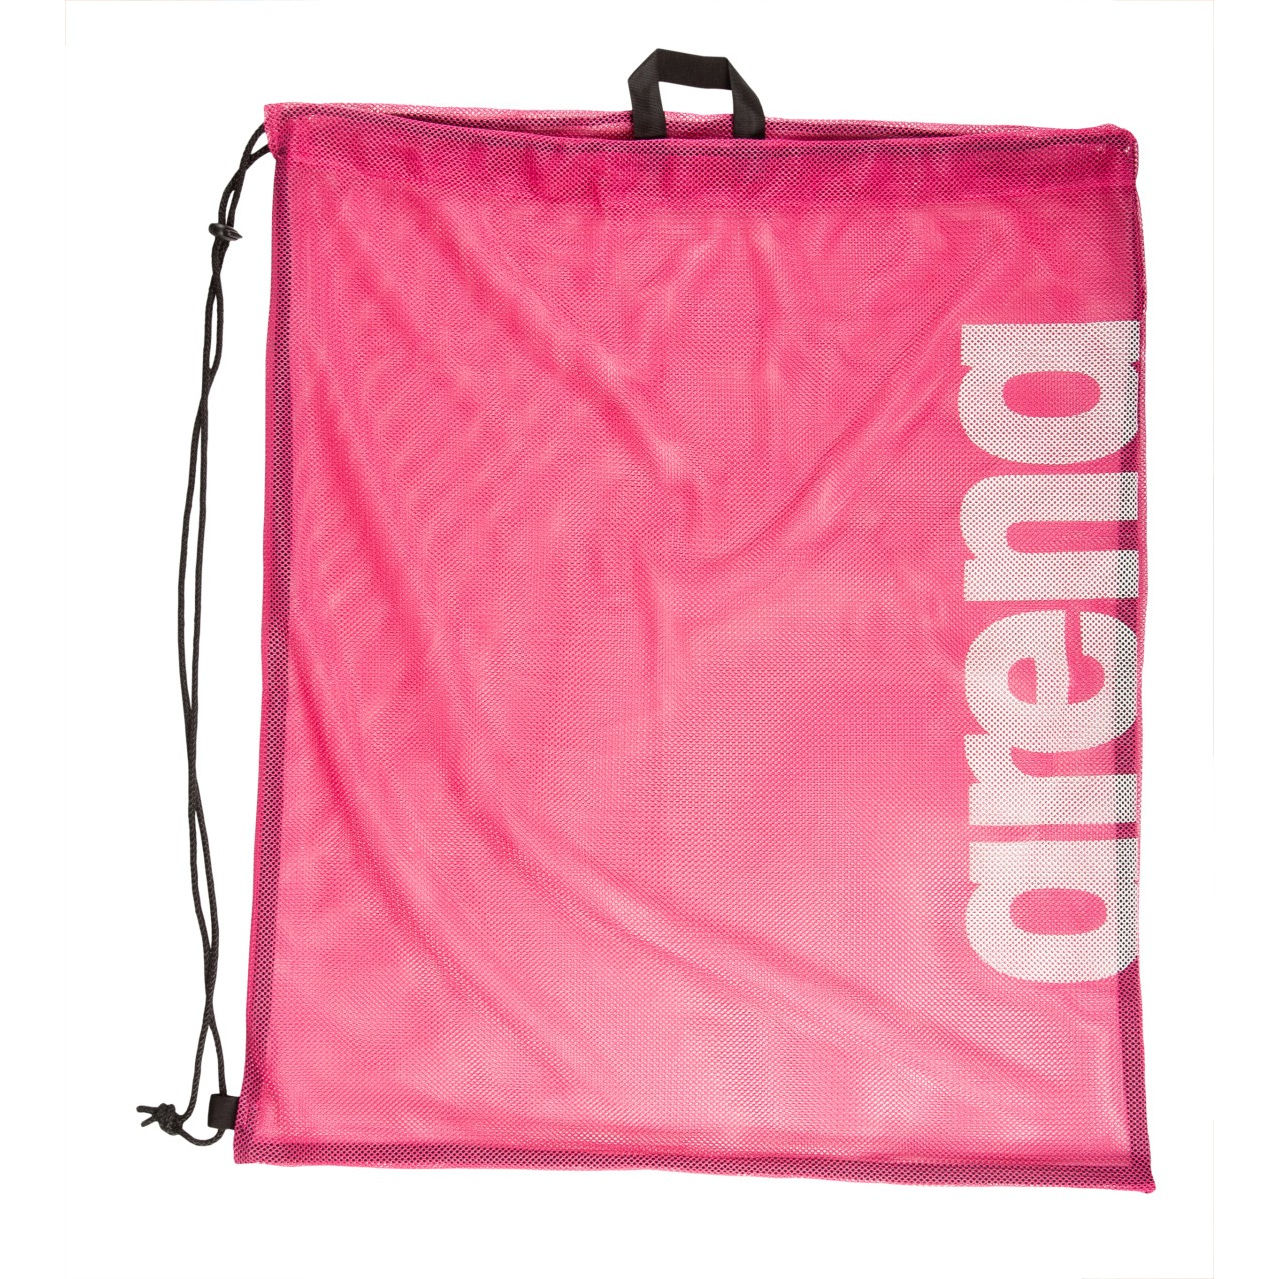 Picture of arena Team Mesh Bag - Pink